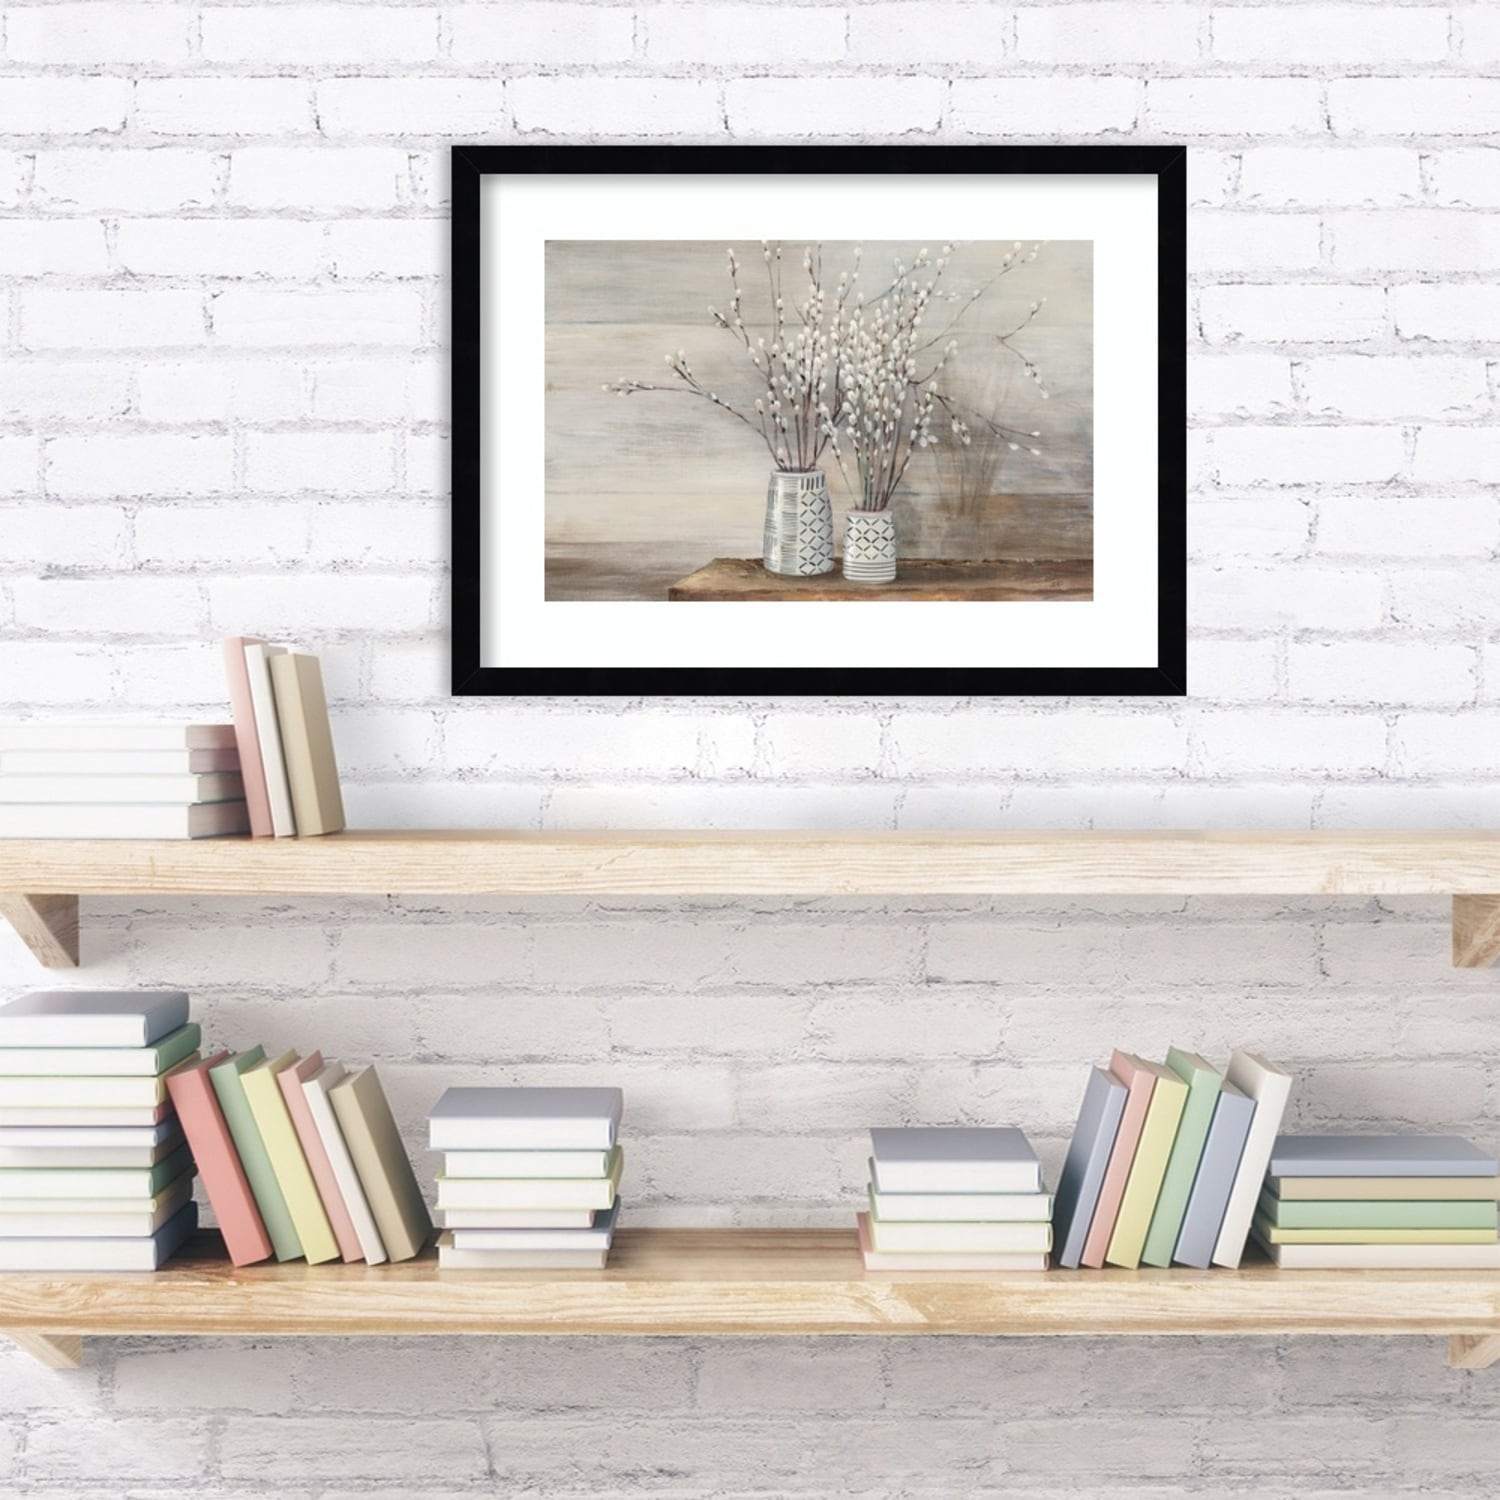 P Willow Still Life with Designs by Julia PurintonFramed Art Print